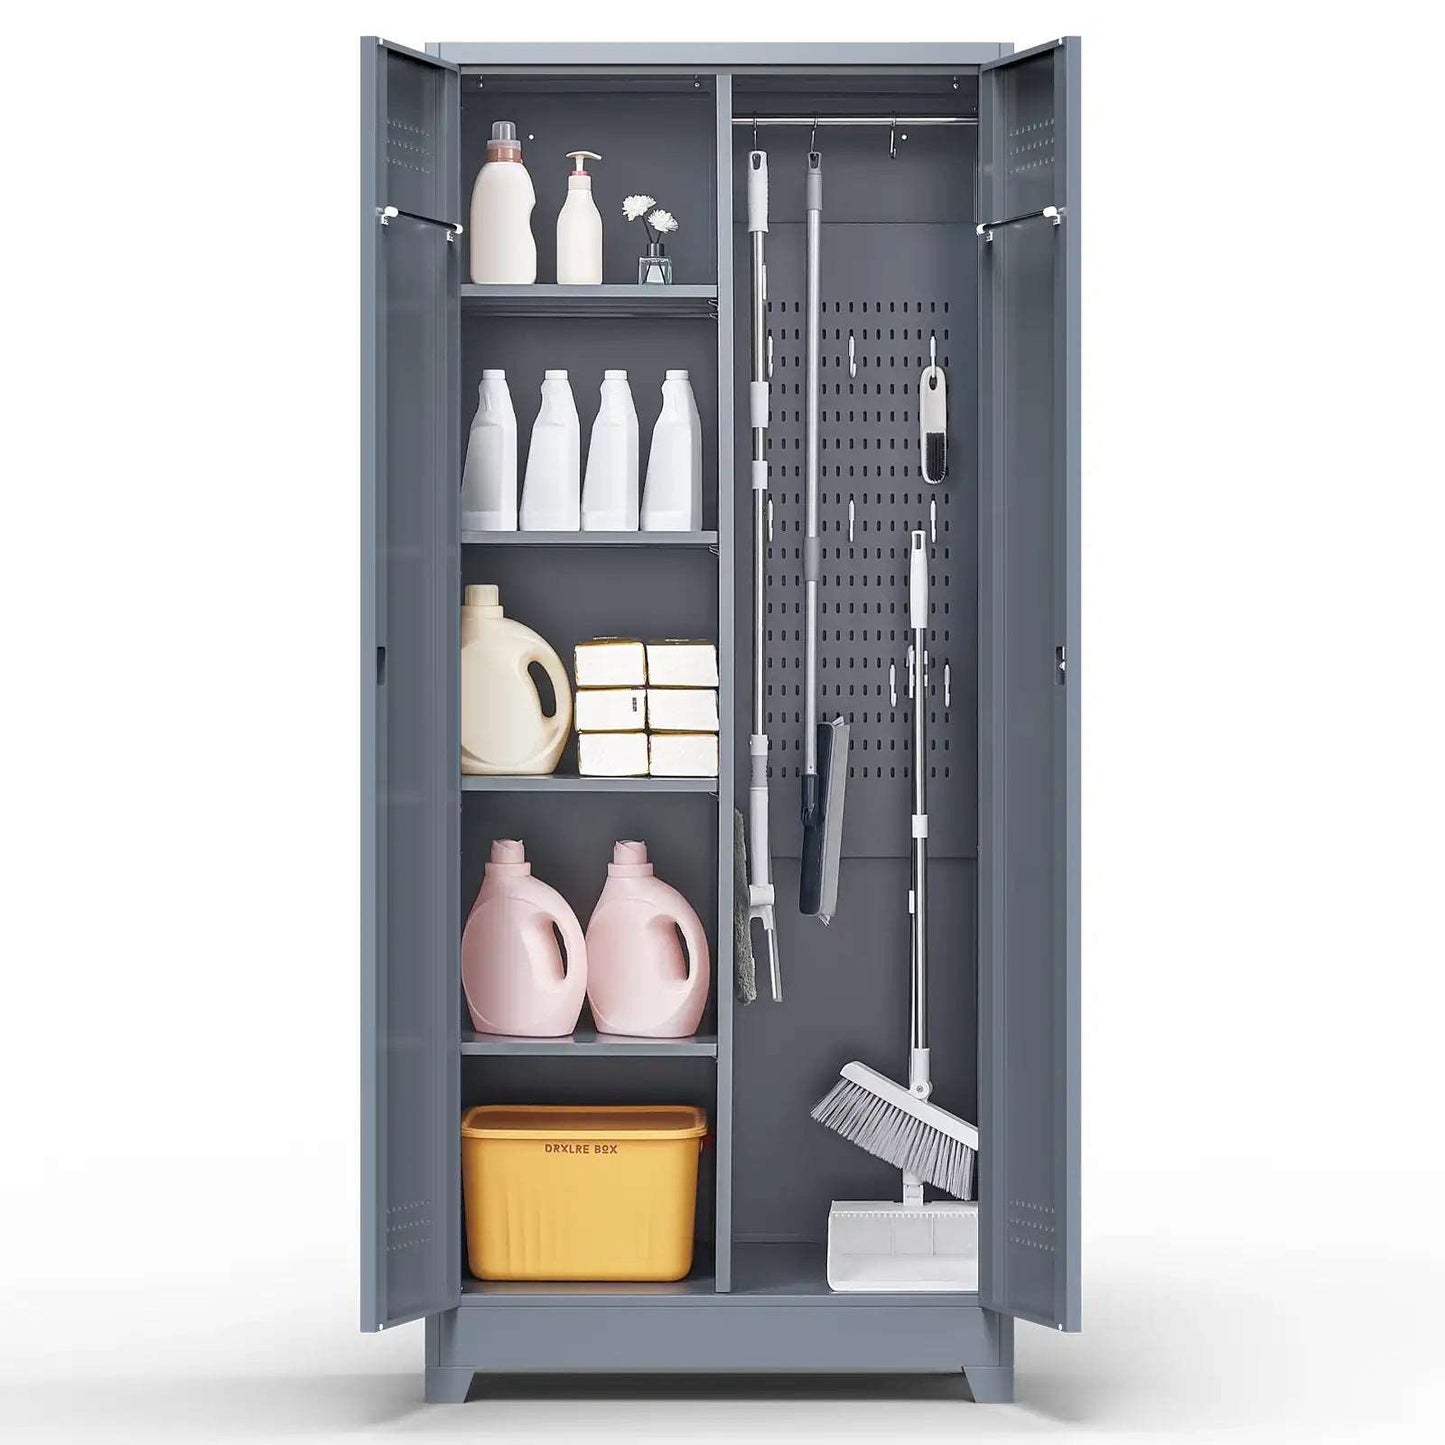 GREATMEET Broom Closet Storage Cabinet with Locking Doors, Metal Storage Cabinet with Hanging Rod,Garage Storage Cabinet with Hook,Cleaning Tool Cabinet